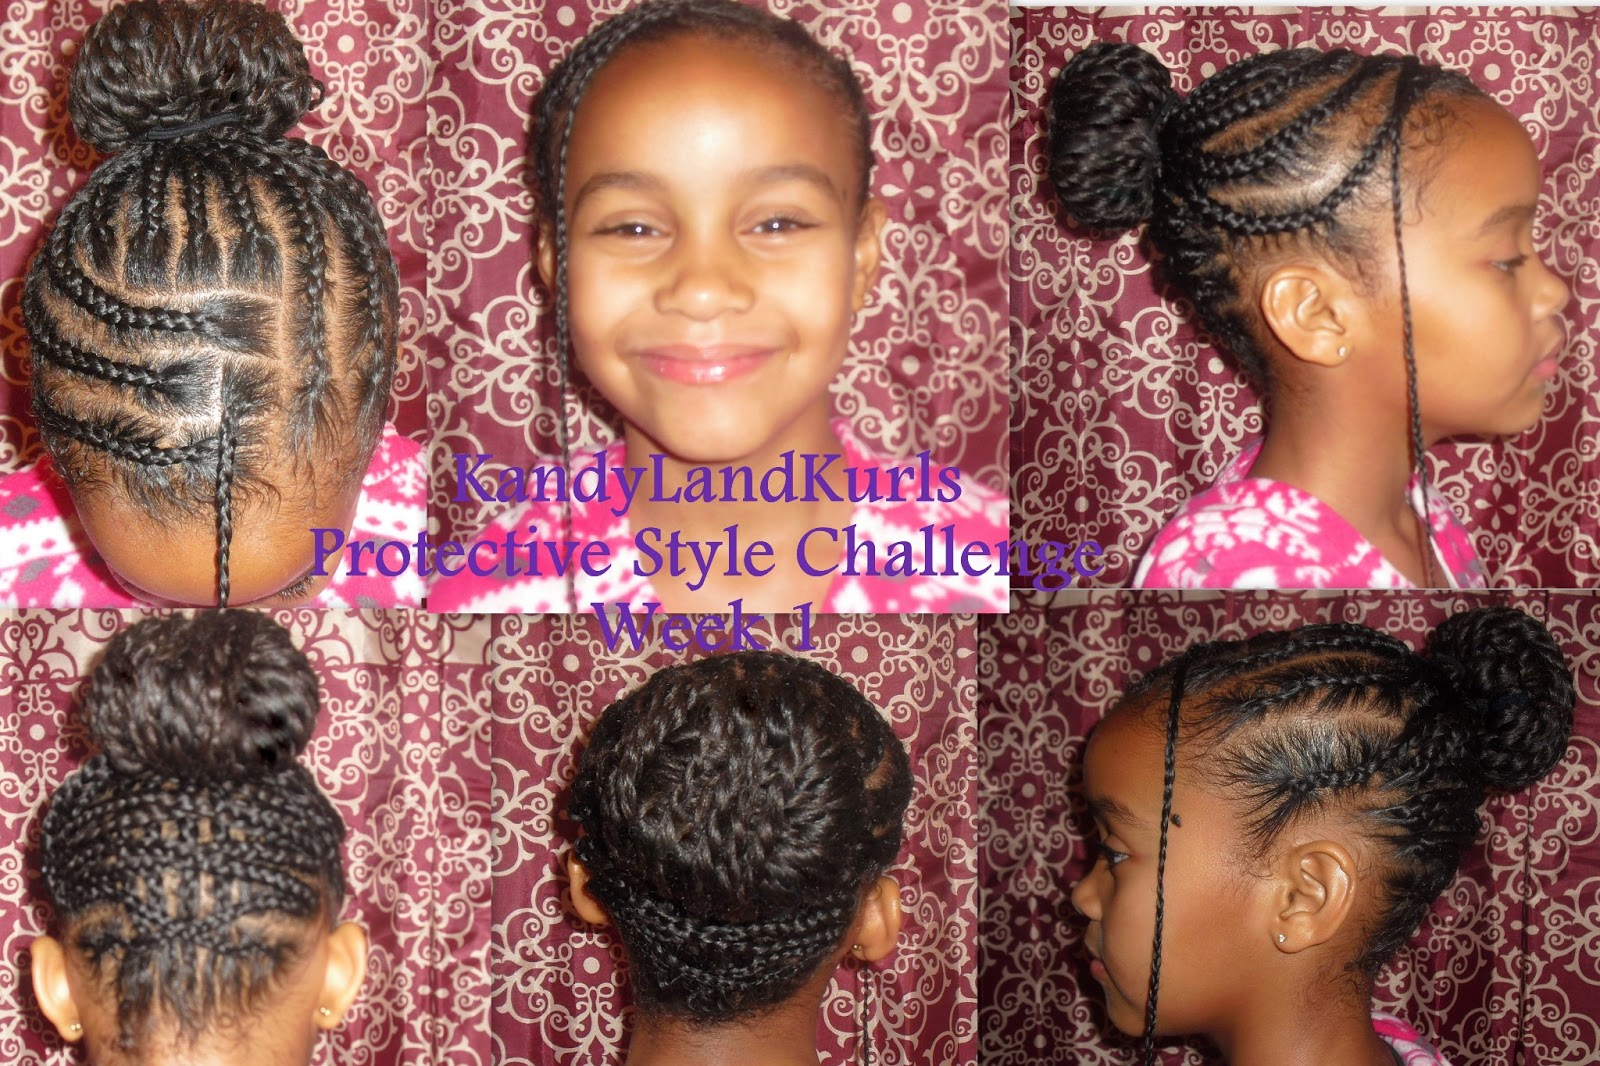 African American Braid Hairstyles Gallery For Women Her friends at Girl Scouts really loved her hairstyle, and asked me 